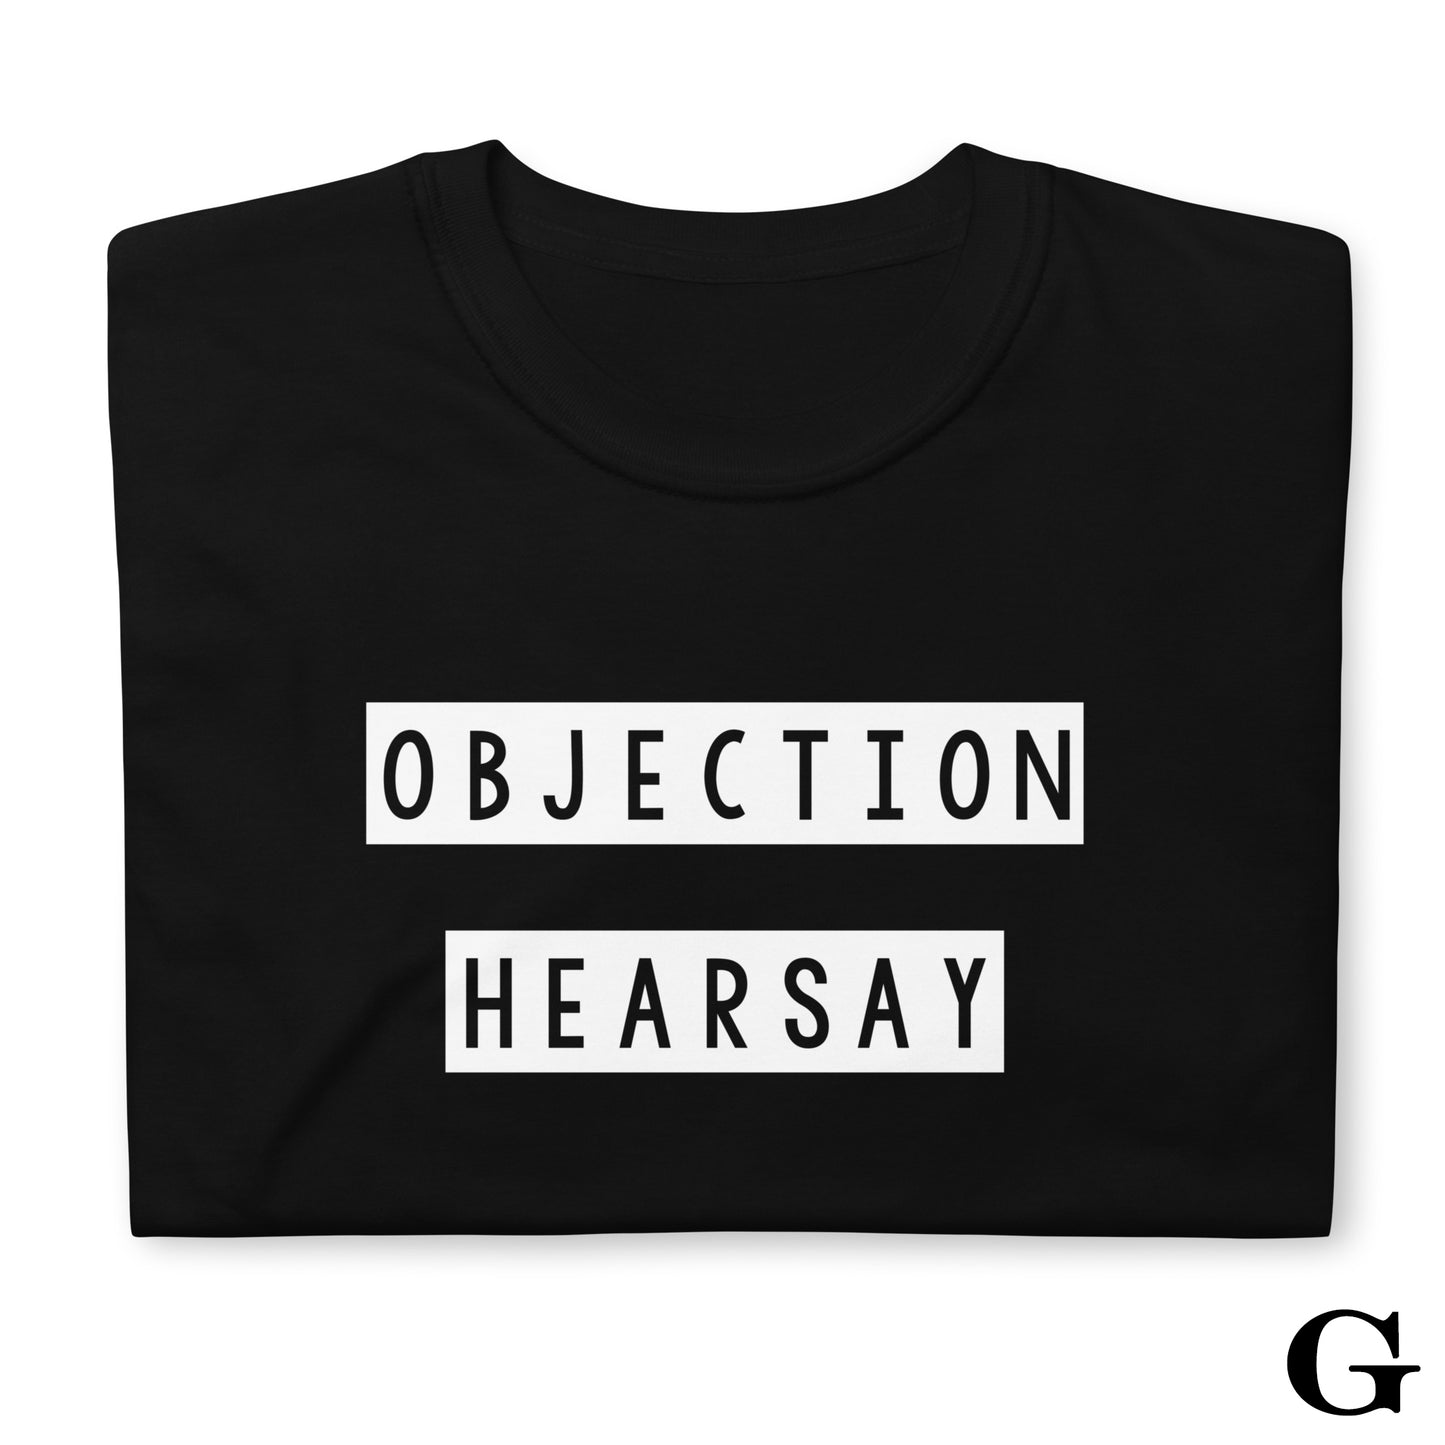 Objection Hearsay T-Shirt - Justice For Johnny